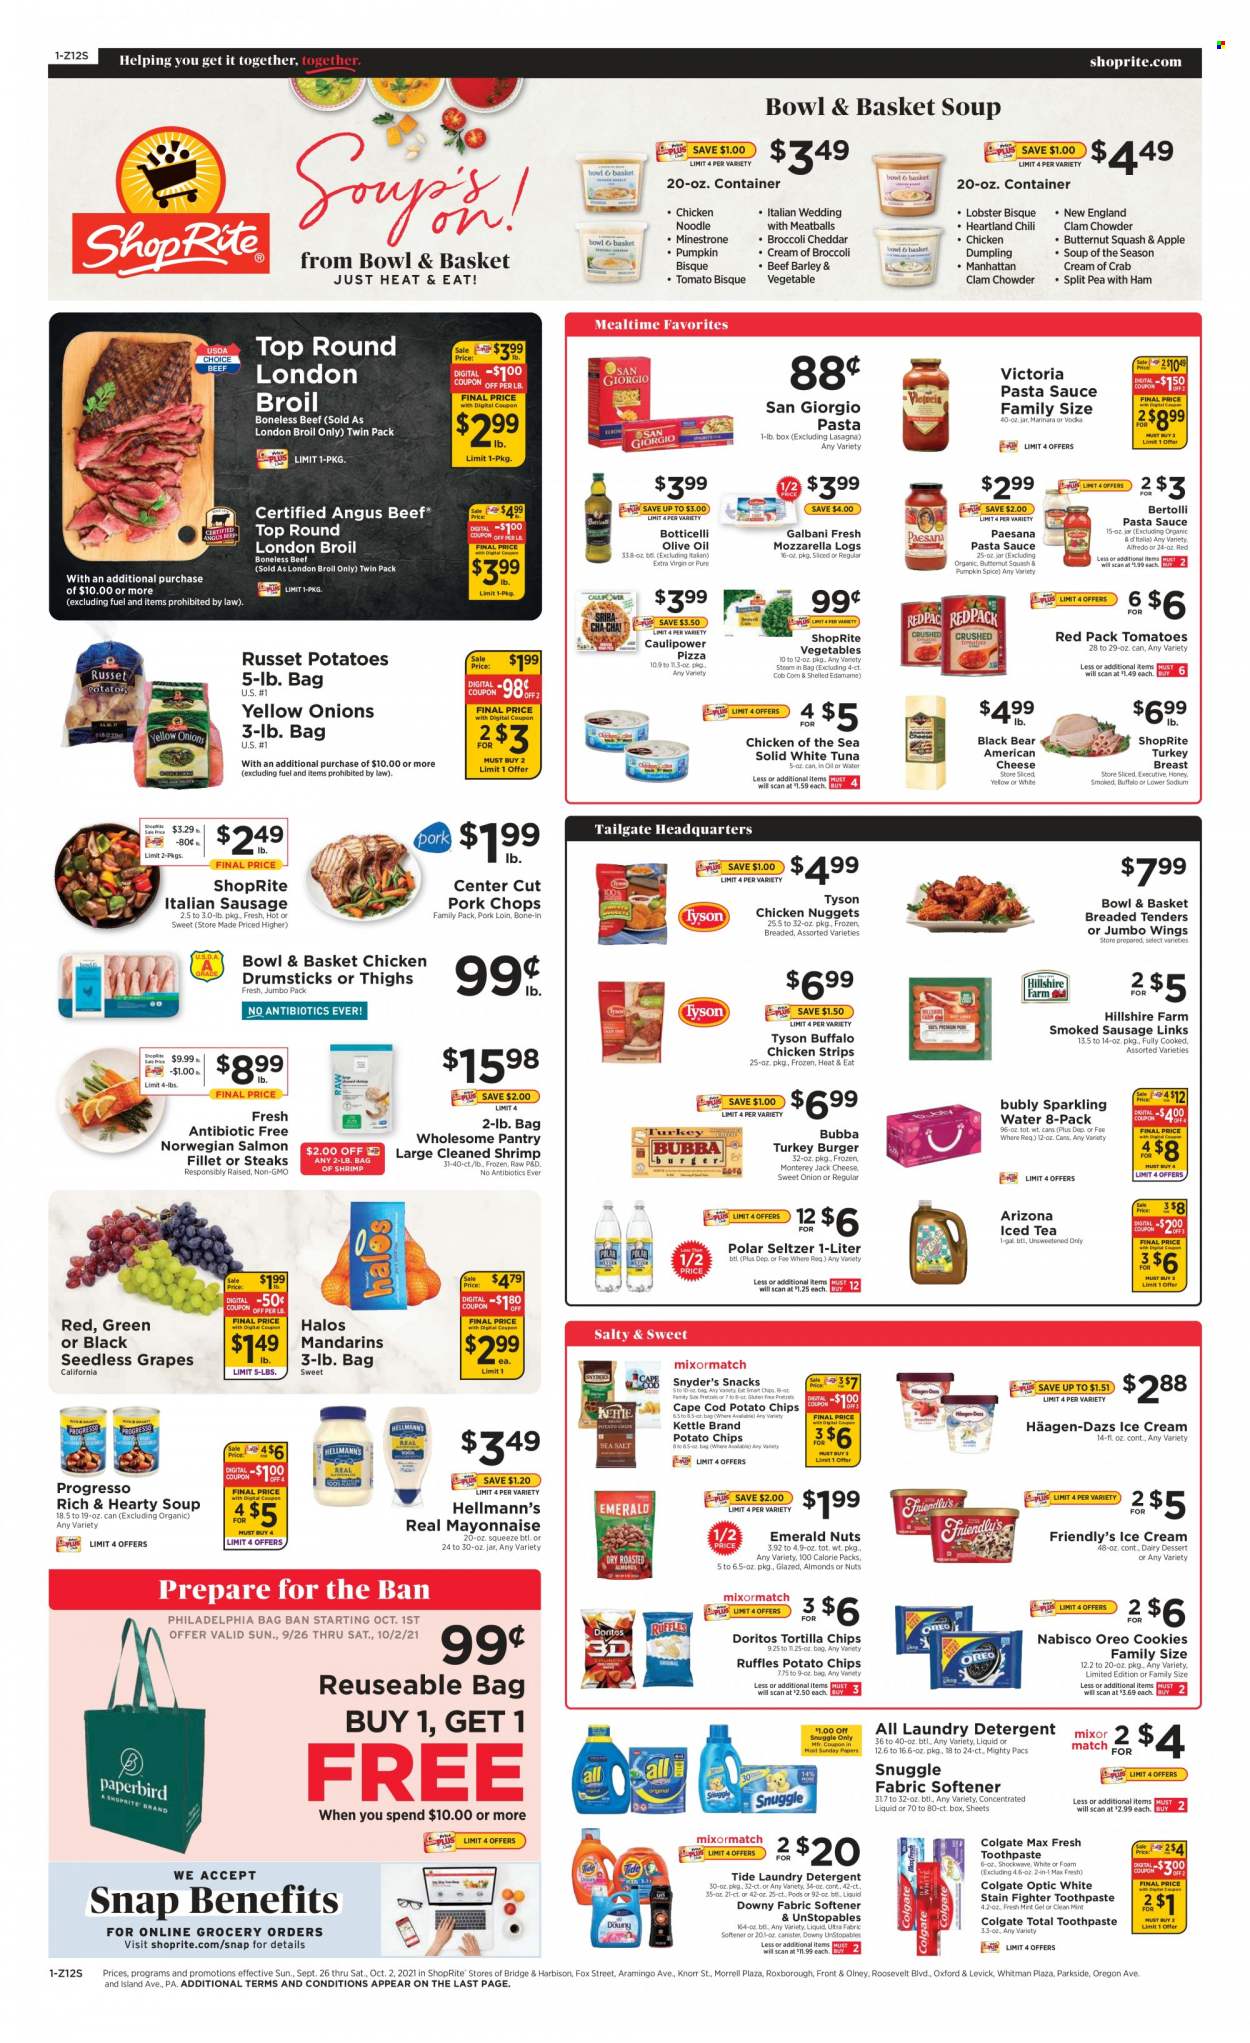 thumbnail - ShopRite Flyer - 09/26/2021 - 10/02/2021 - Sales products - Bowl & Basket, dessert, broccoli, butternut squash, Edamame, russet potatoes, onion, snack, grapes, mandarines, seedless grapes, fish fillets, salmon, salmon fillet, tuna, crab, shrimps, pizza, pasta sauce, meatballs, soup, nuggets, Knorr, sauce, chicken nuggets, dumplings, Progresso, chicken strips, burger patties, Bertolli, ready meal, ham, Hillshire Farm, smoked sausage, italian sausage, american cheese, mozzarella, Philadelphia, cheese, Galbani, Oreo, mayonnaise, Hellmann’s, ice cream, Häagen-Dazs, Friendly's Ice Cream, chicken wings, Nabisco, Doritos, tortilla chips, potato chips, Heartland, Ruffles, salty snack, canned tuna, Chicken of the Sea, clam chowder, canned fish, extra virgin olive oil, olive oil, oil, almonds, ice tea, AriZona, seltzer water, sparkling water, bottled water, vodka, chicken thighs, chicken drumsticks, chicken, beef meat, beef steak, steak, turkey burger, pork chops, pork loin, pork meat, detergent, Snuggle, Tide, Unstopables, fabric softener, laundry detergent, Downy Laundry, Colgate, toothpaste, canister, container. Page 1.